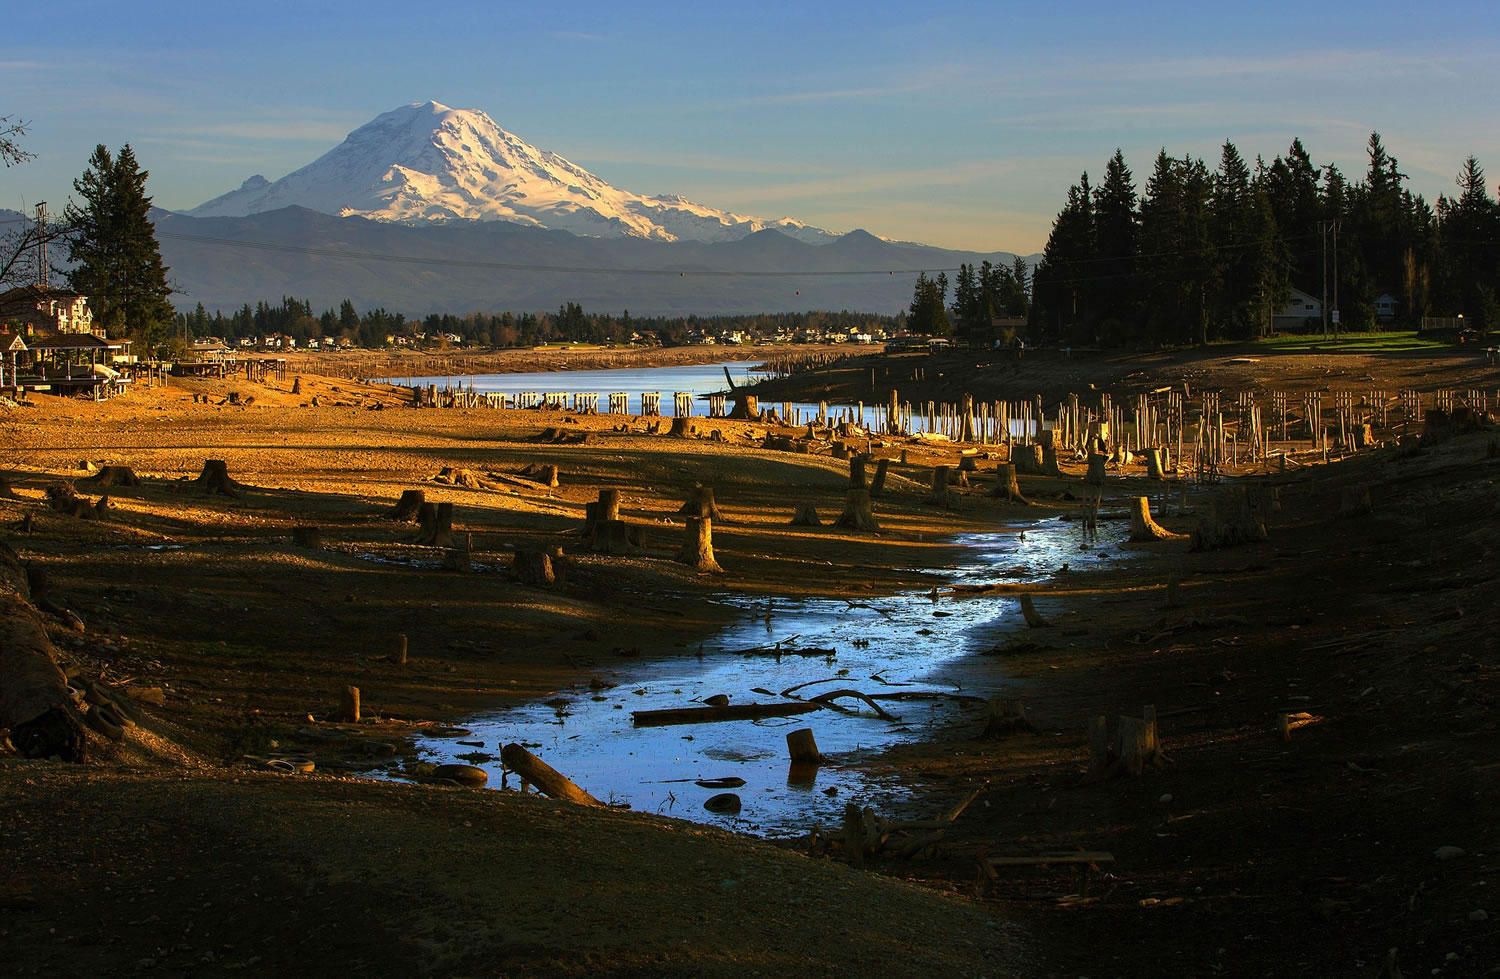 With Mount Rainier in the background, Lake Tapps near Sumner is shown in February with lowered water levels due to maintenance being done by the Cascade Water Alliance, which owns the lake.